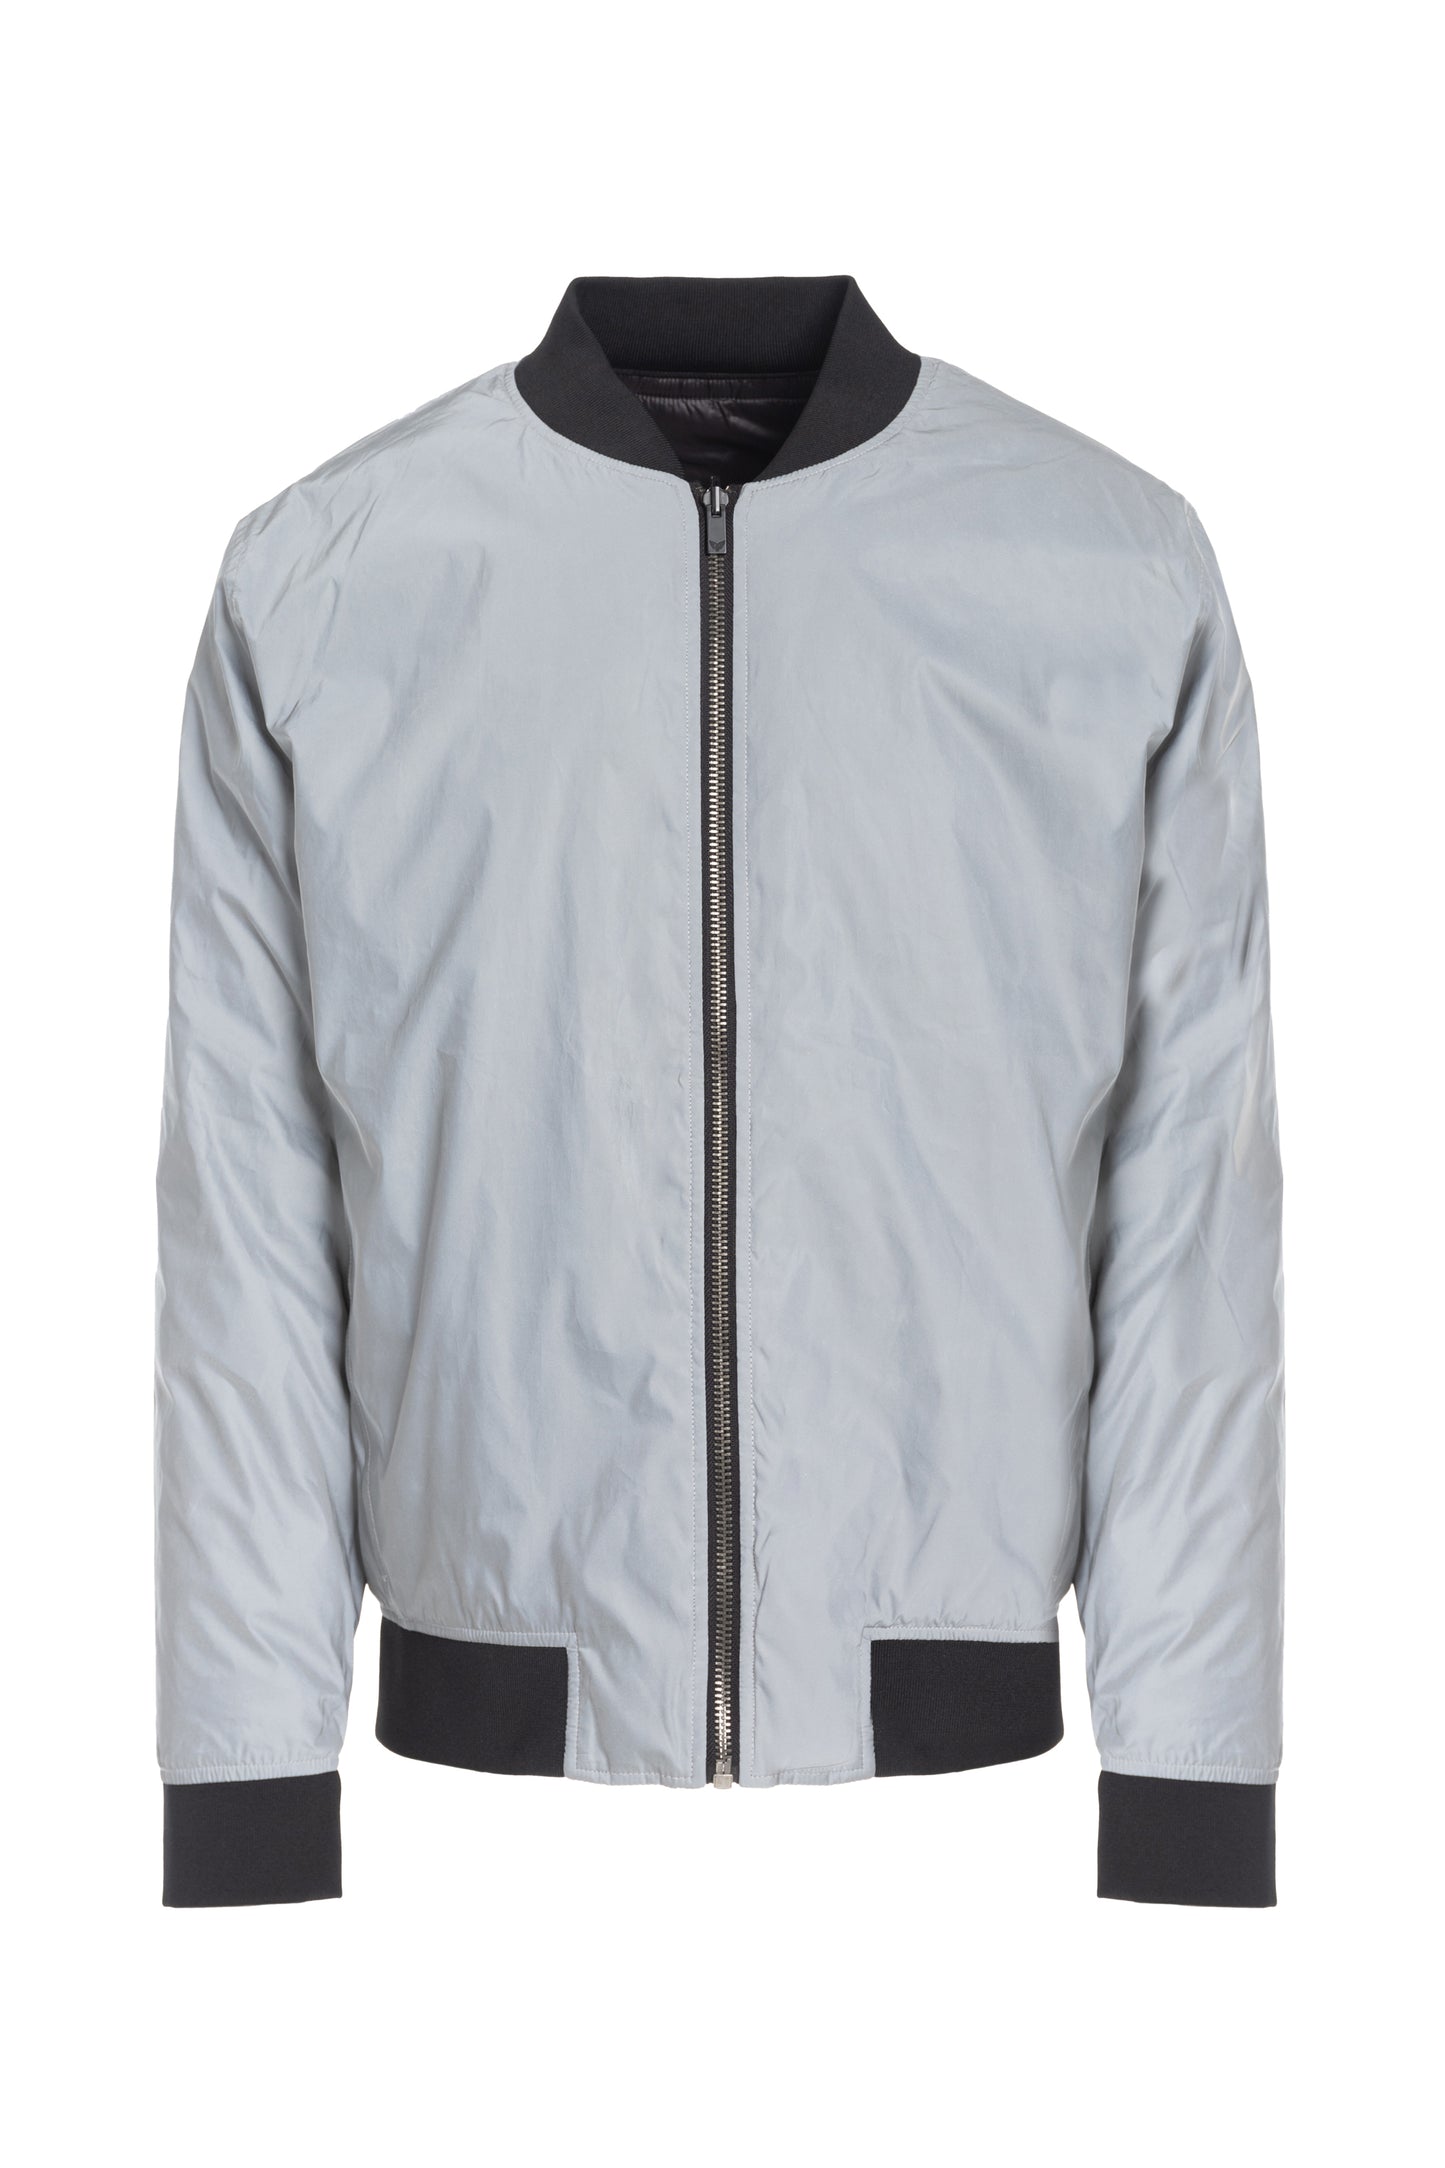 Alternative Down Reflective and Reversable Bomber